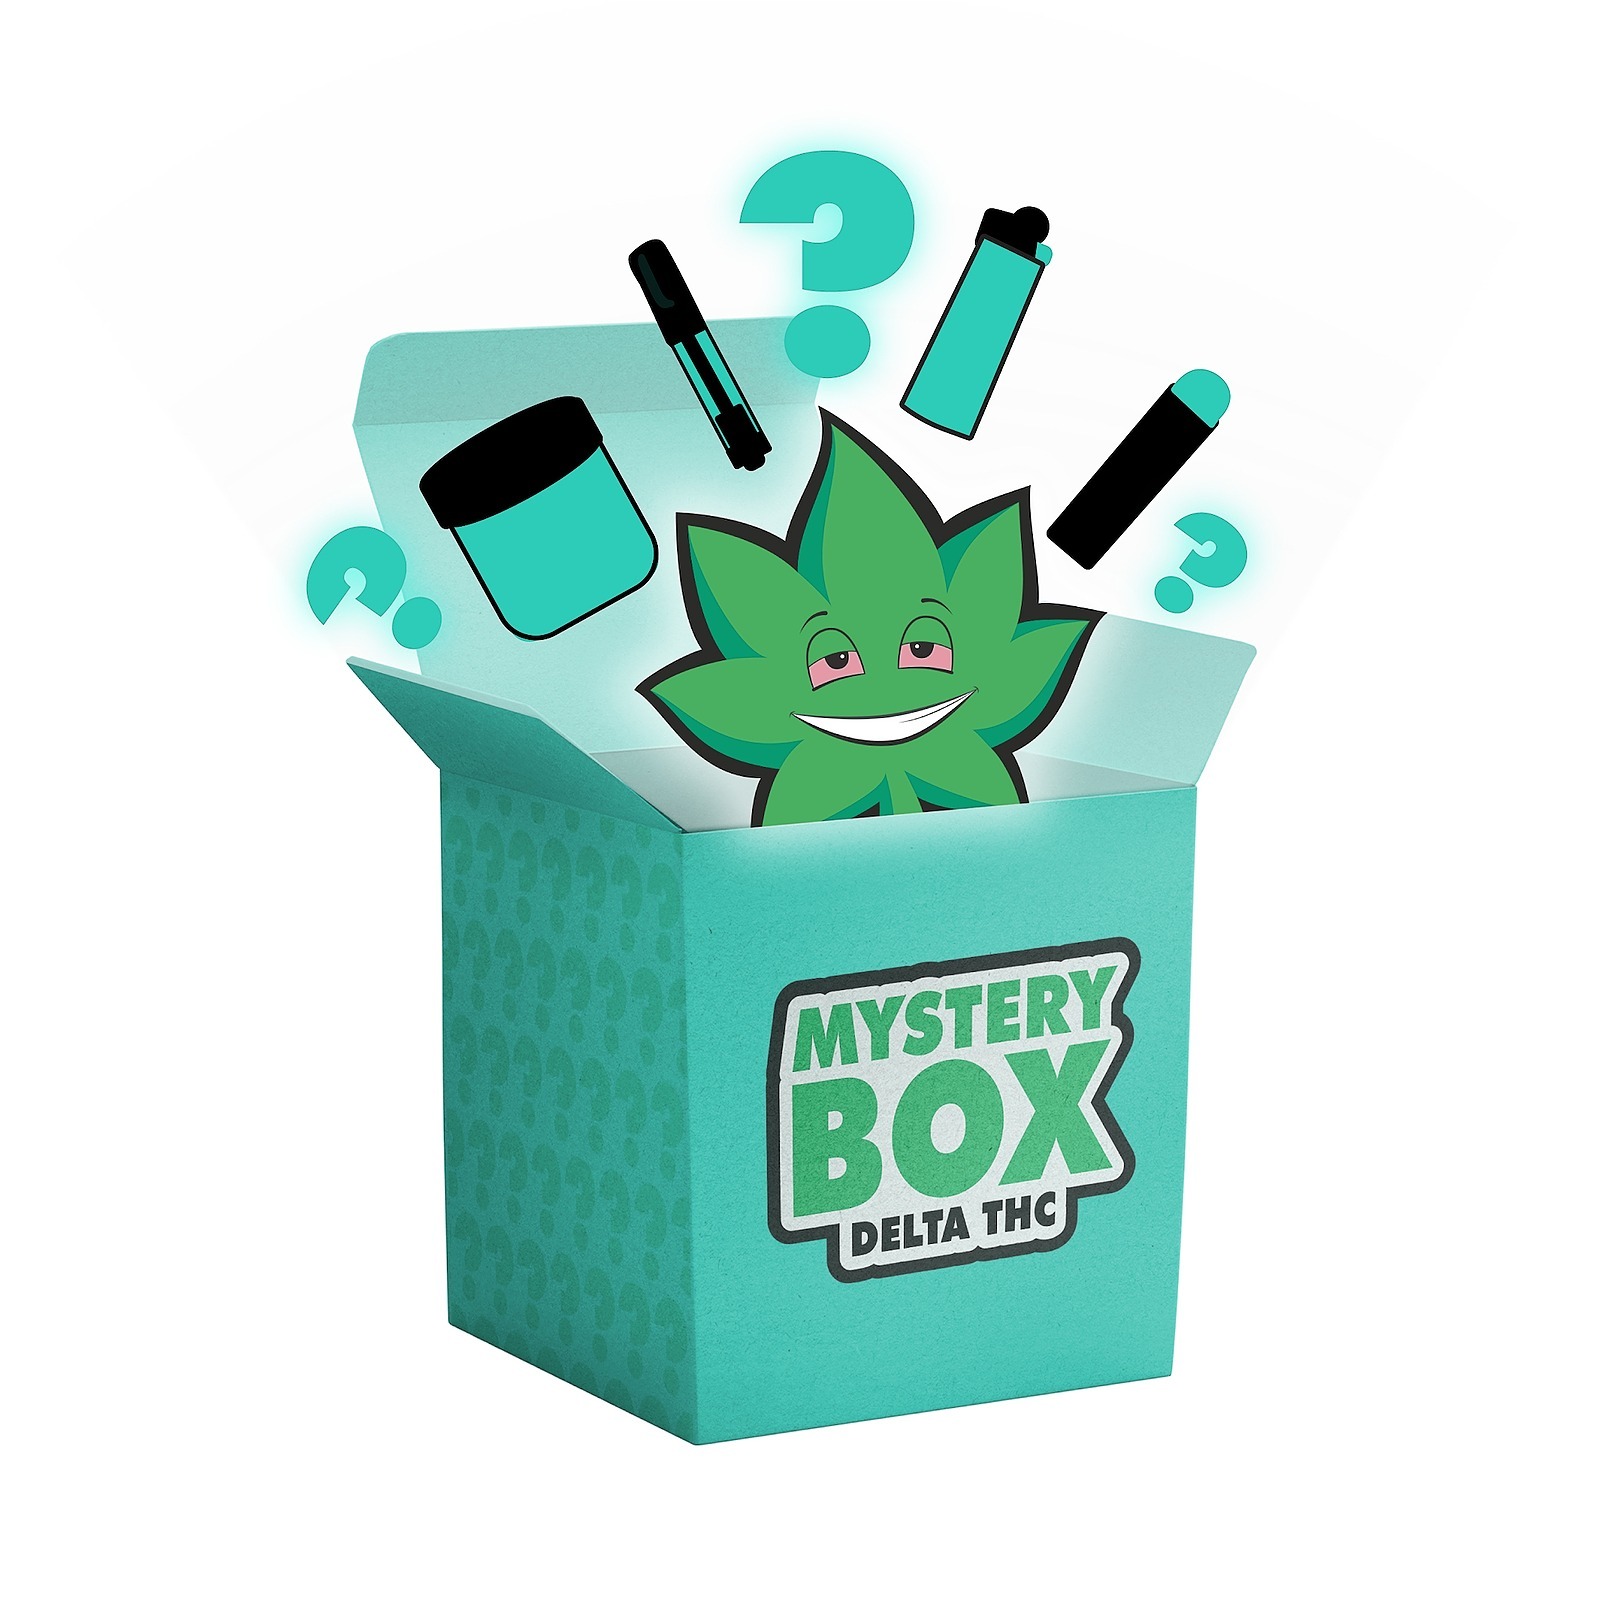 What is the best mystery box?. A mystery box is a container or